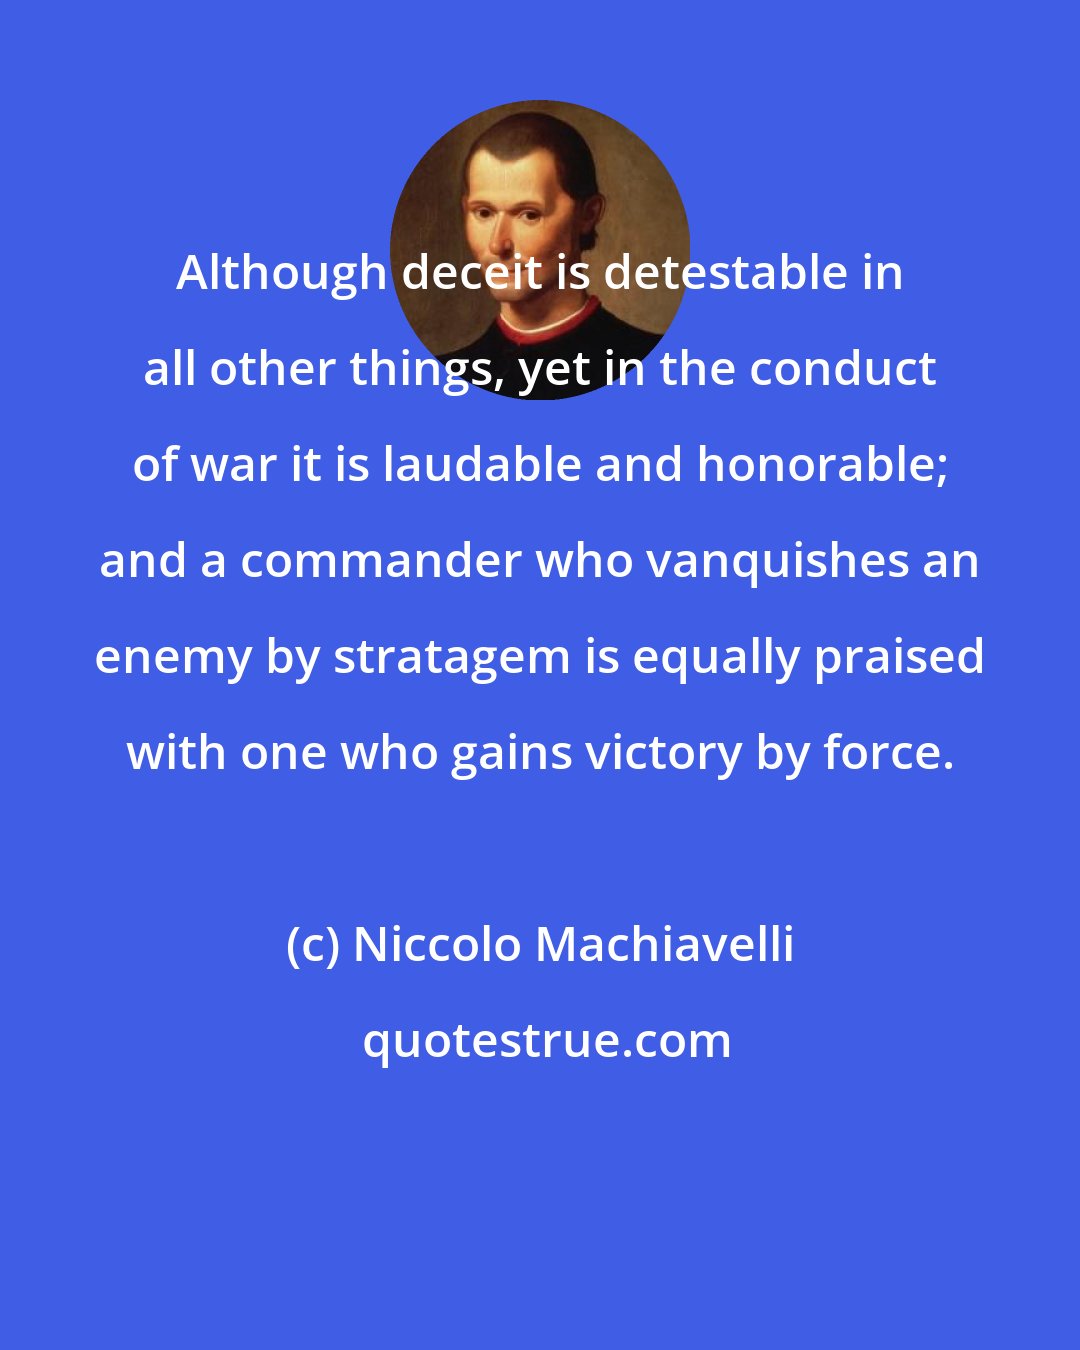 Niccolo Machiavelli: Although deceit is detestable in all other things, yet in the conduct of war it is laudable and honorable; and a commander who vanquishes an enemy by stratagem is equally praised with one who gains victory by force.